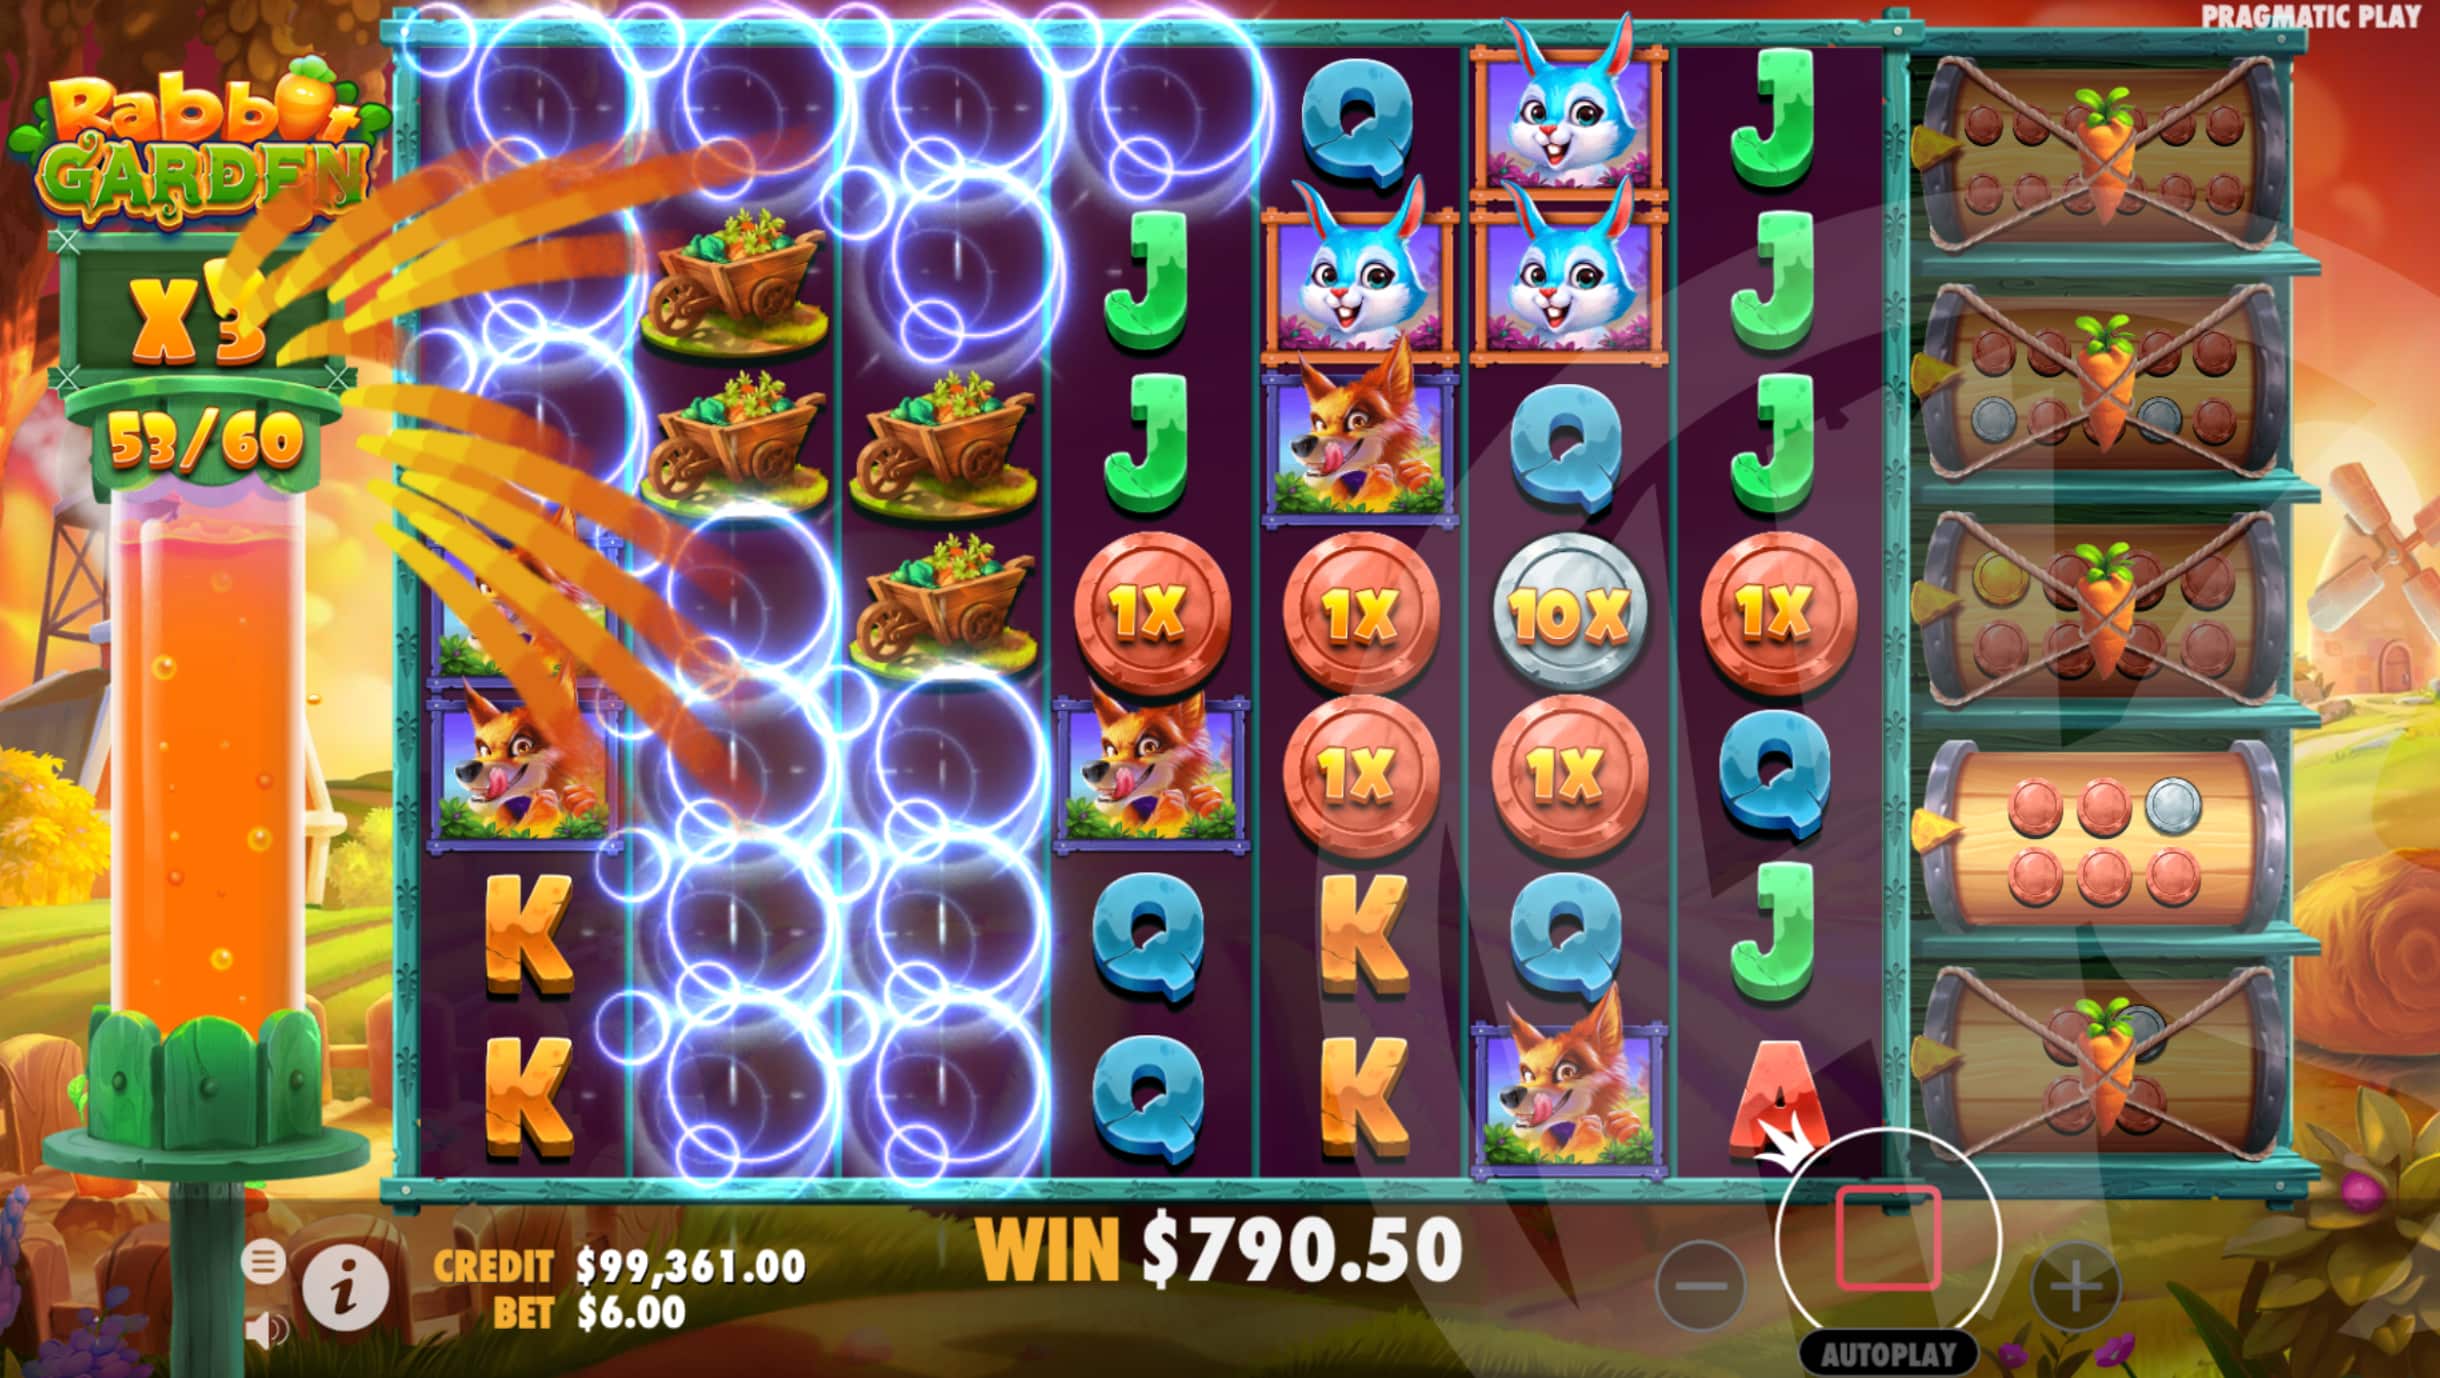 Collect Points to Progress Through Free Spins Levels